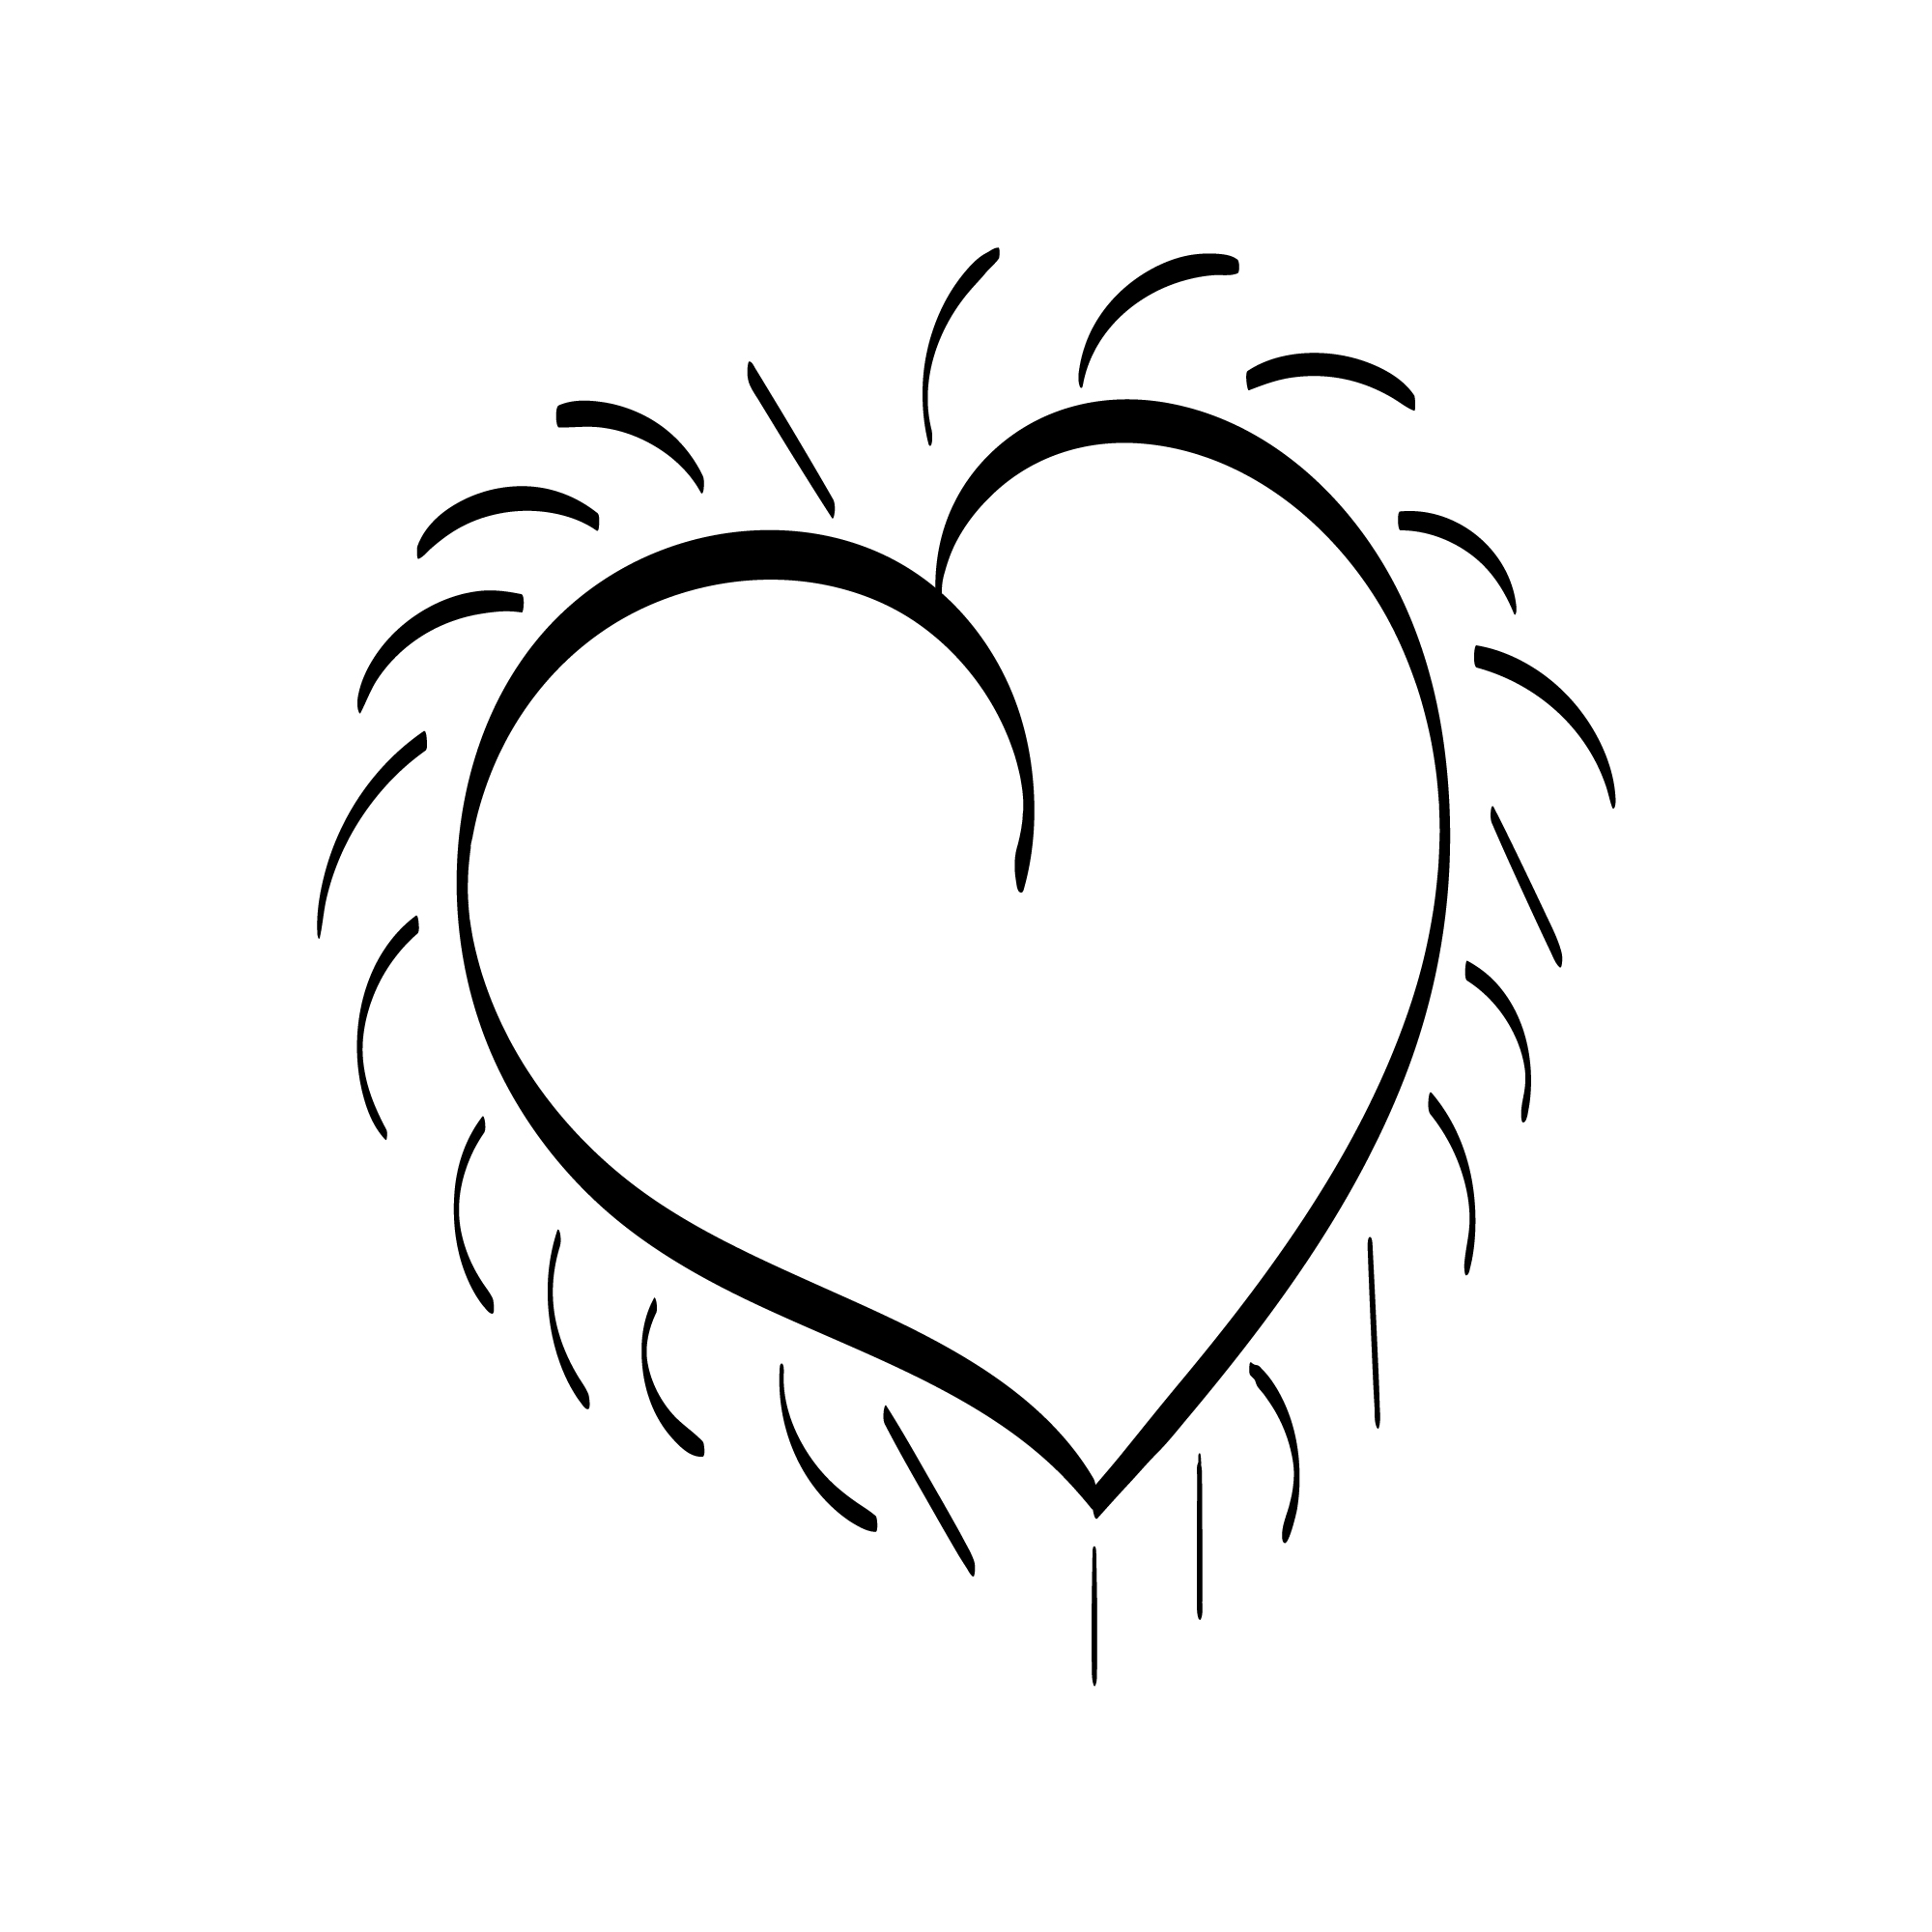 Cozy Heart Hand Drawn preview image.